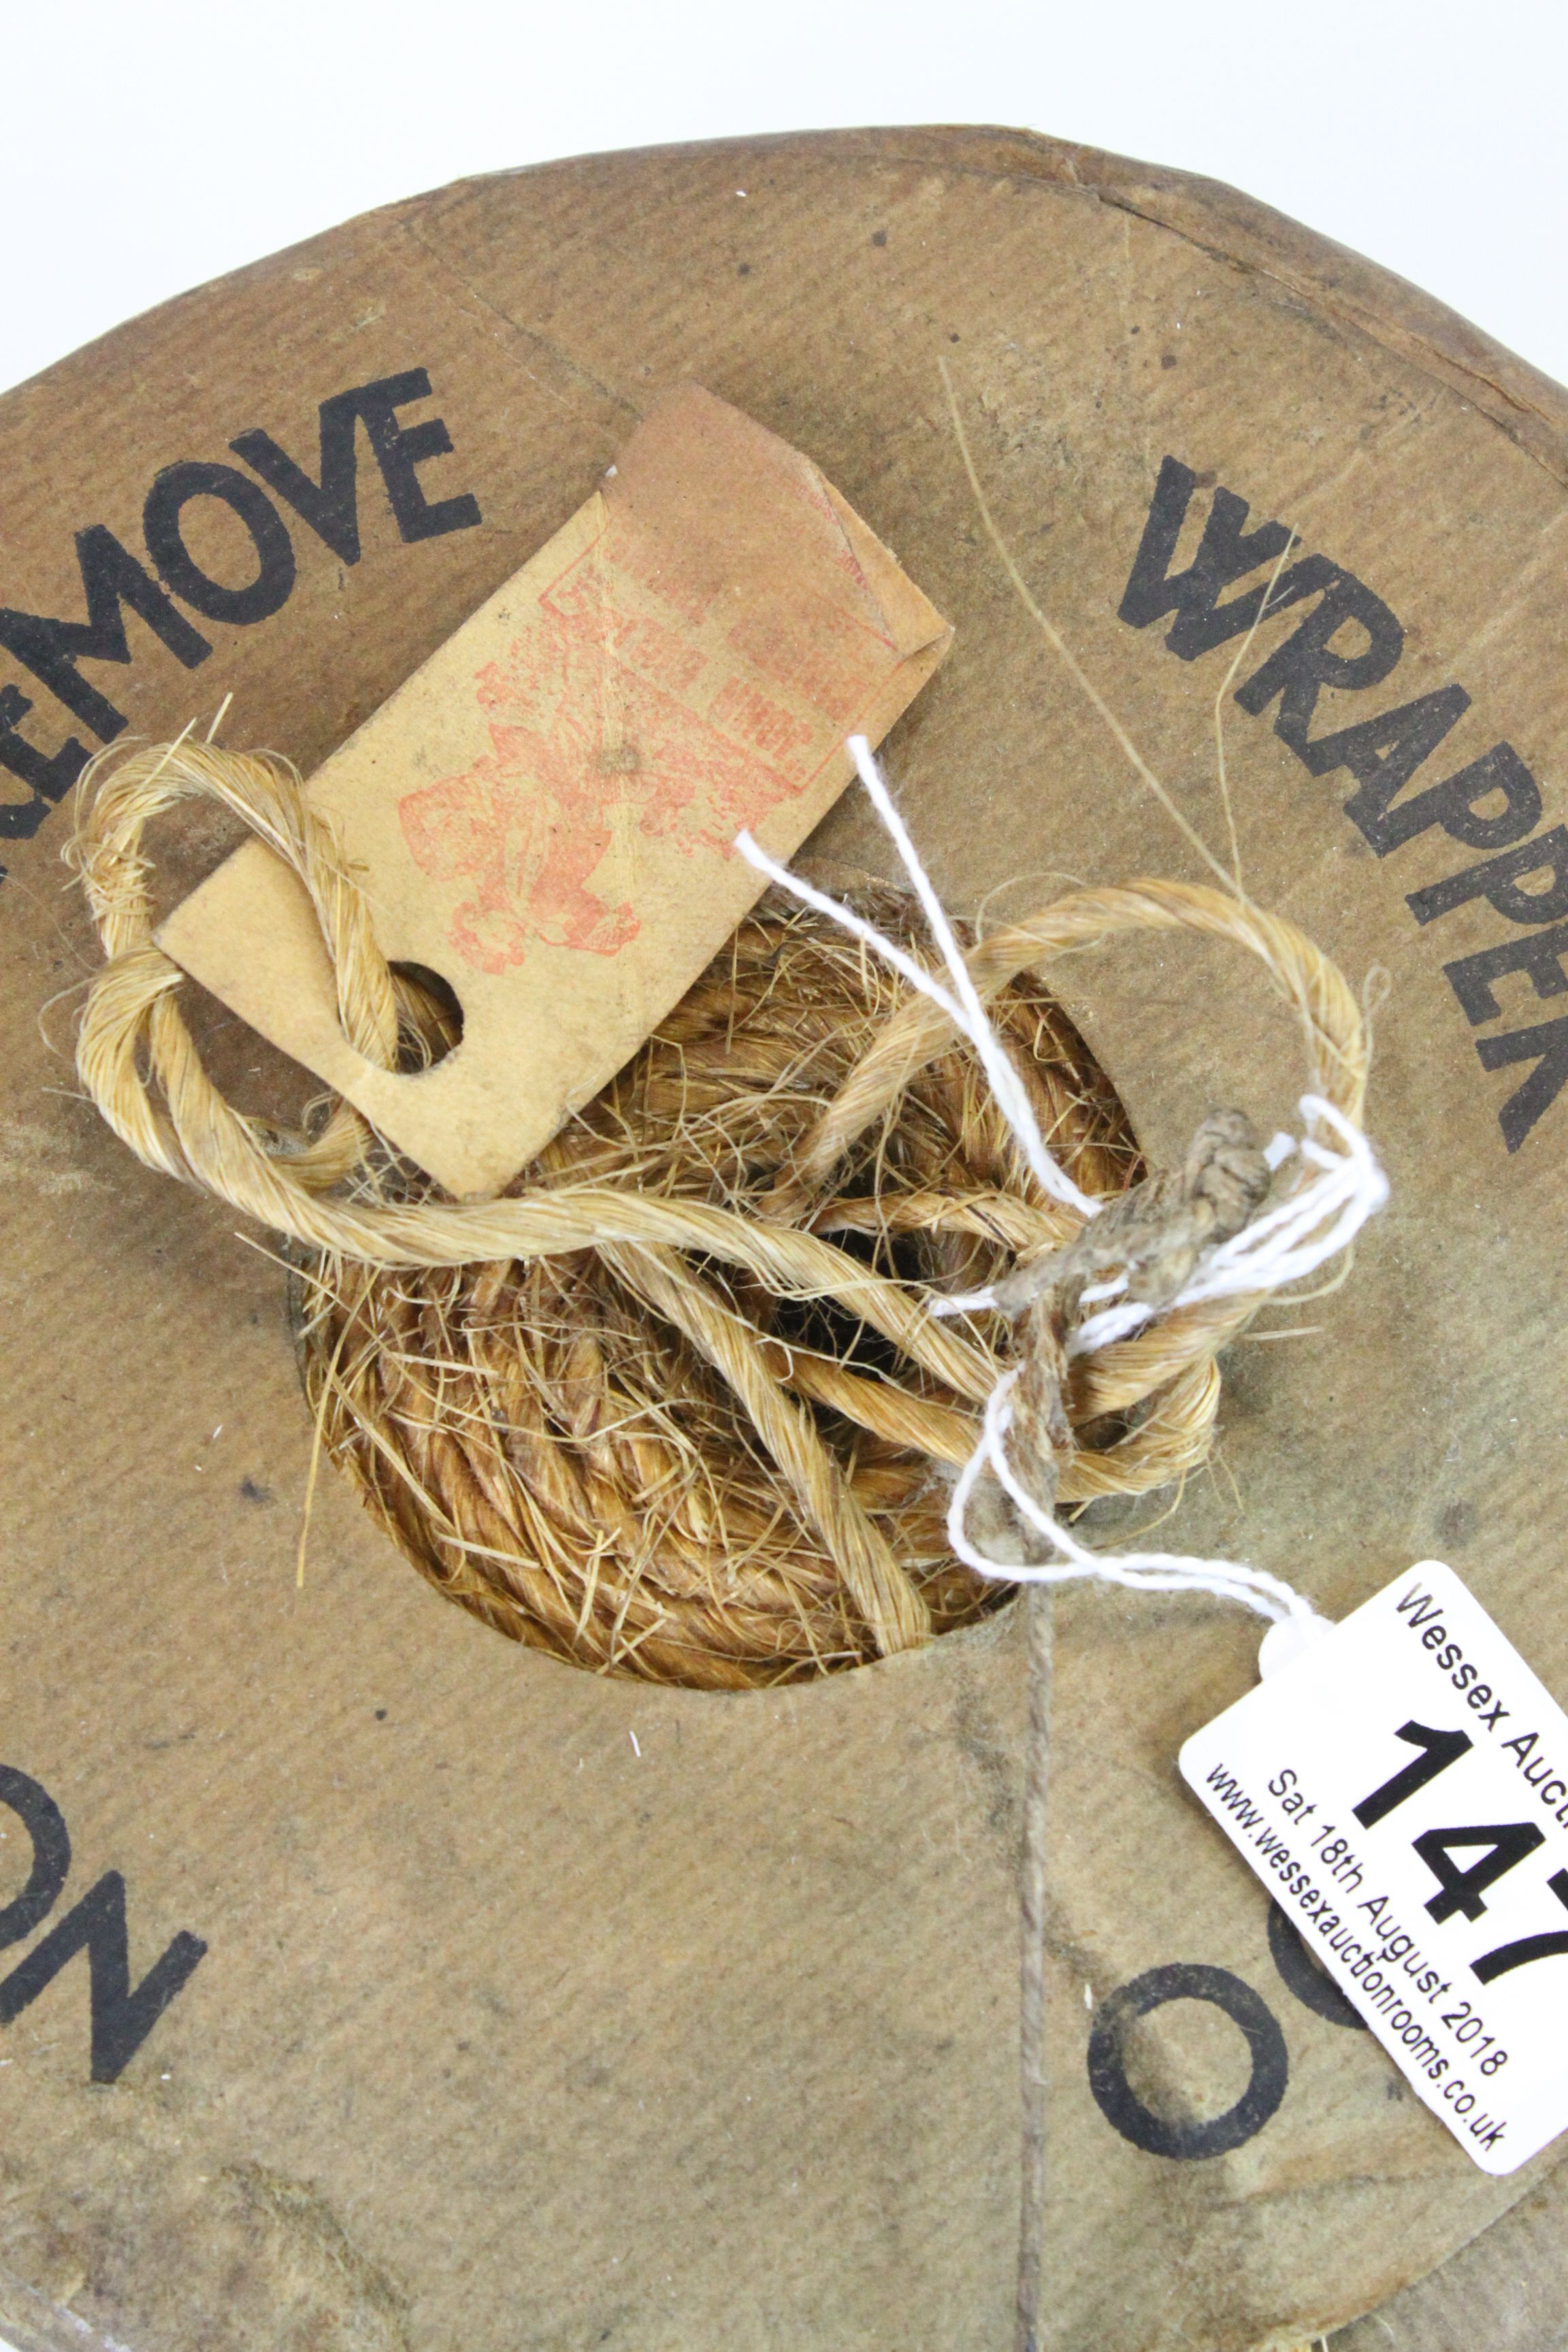 Vintage Wrapped Roll of Binder Twine marked ' John Bull Binder Twine, patent wrapper no. 379705 ' - Image 3 of 4